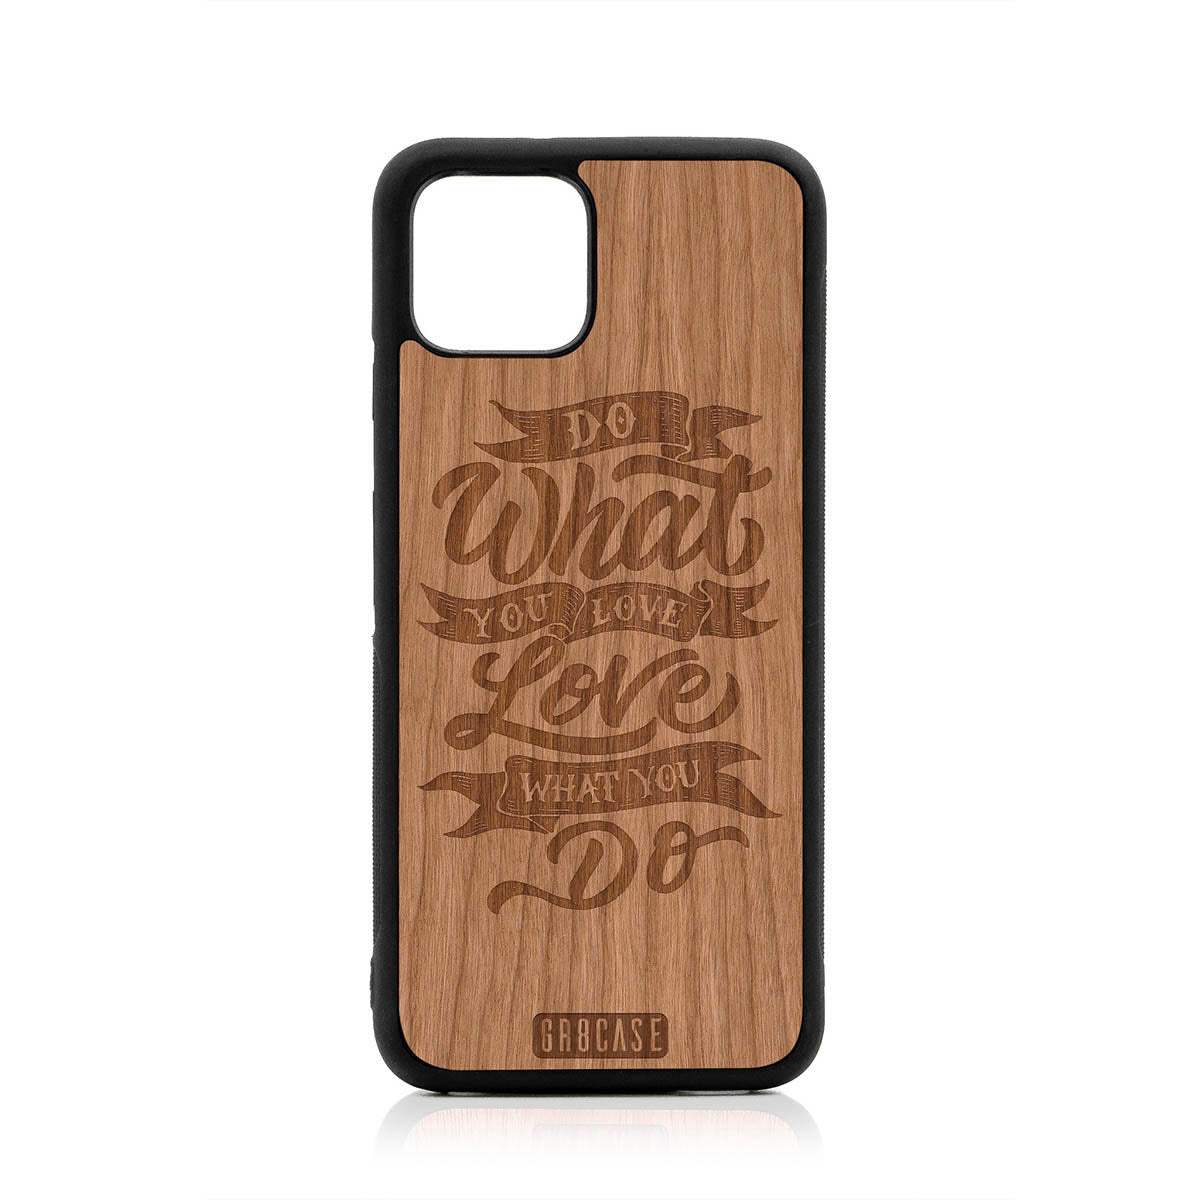 Do What You Love Love What You Do Design Wood Case For Google Pixel 4 by GR8CASE